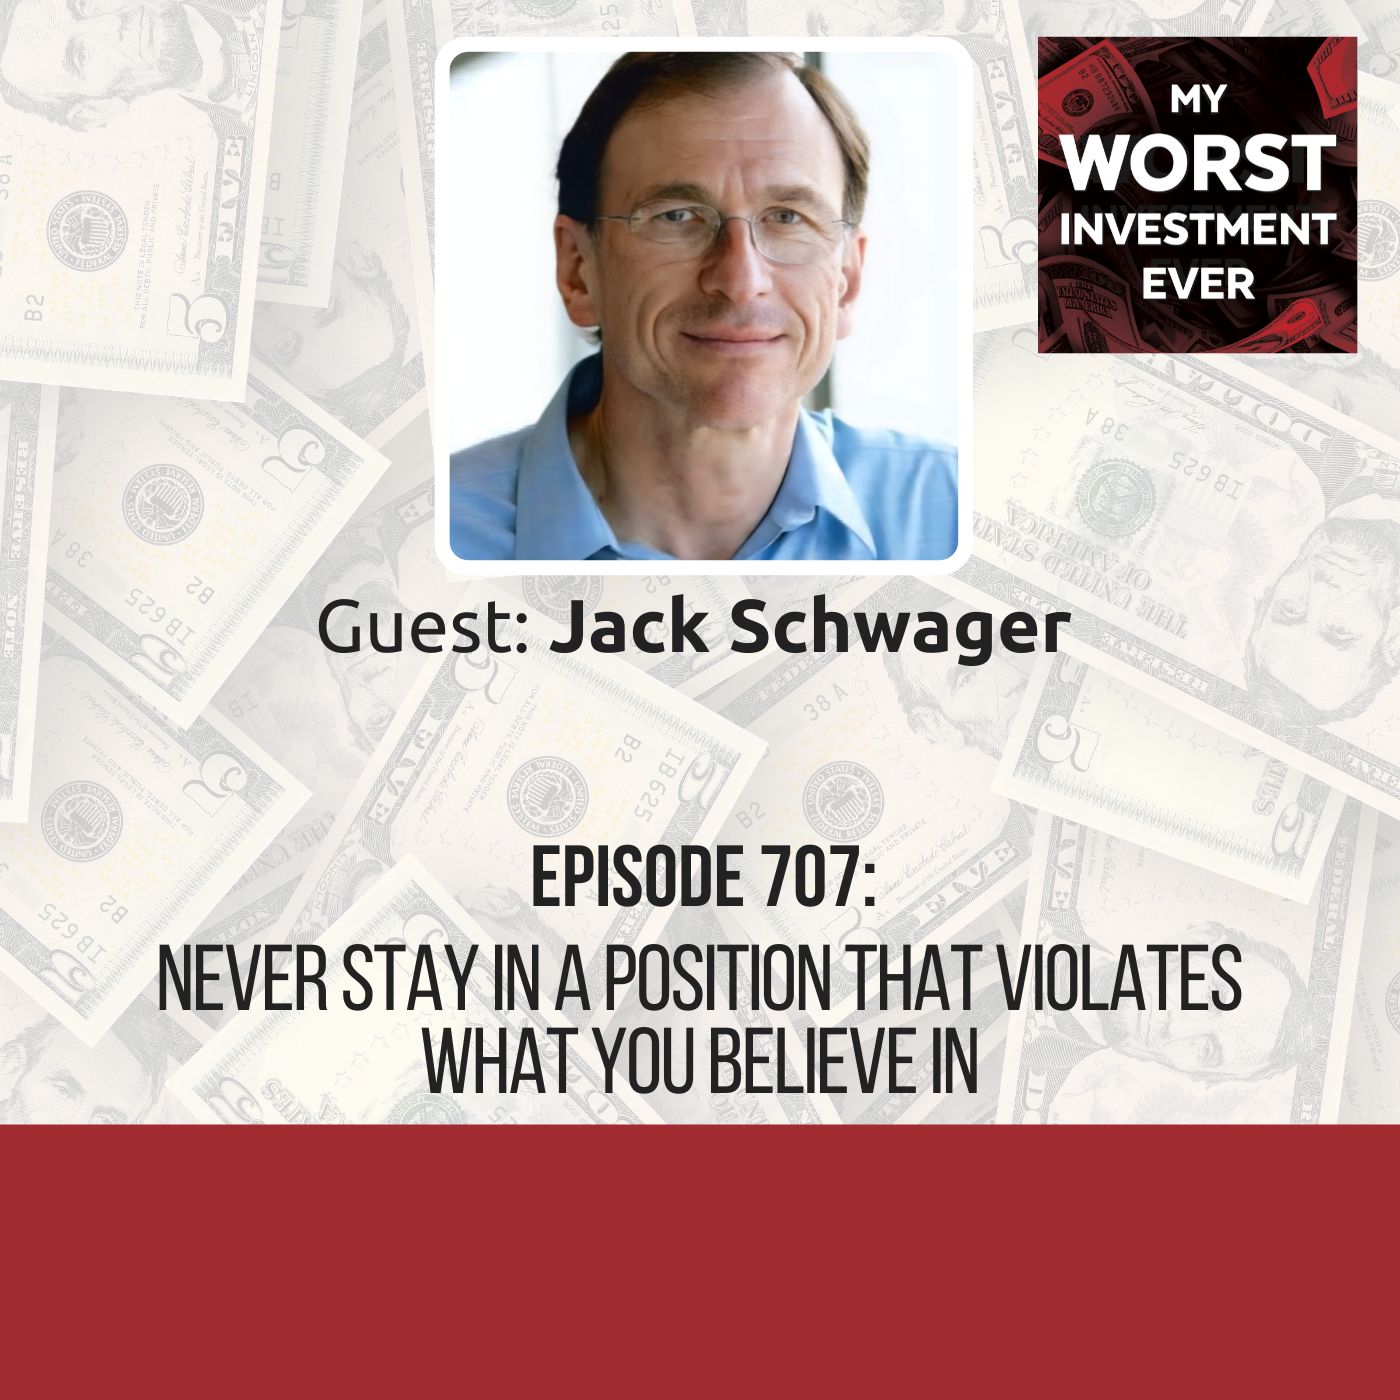 Jack Schwager – Never Stay in a Position That Violates What You Believe In